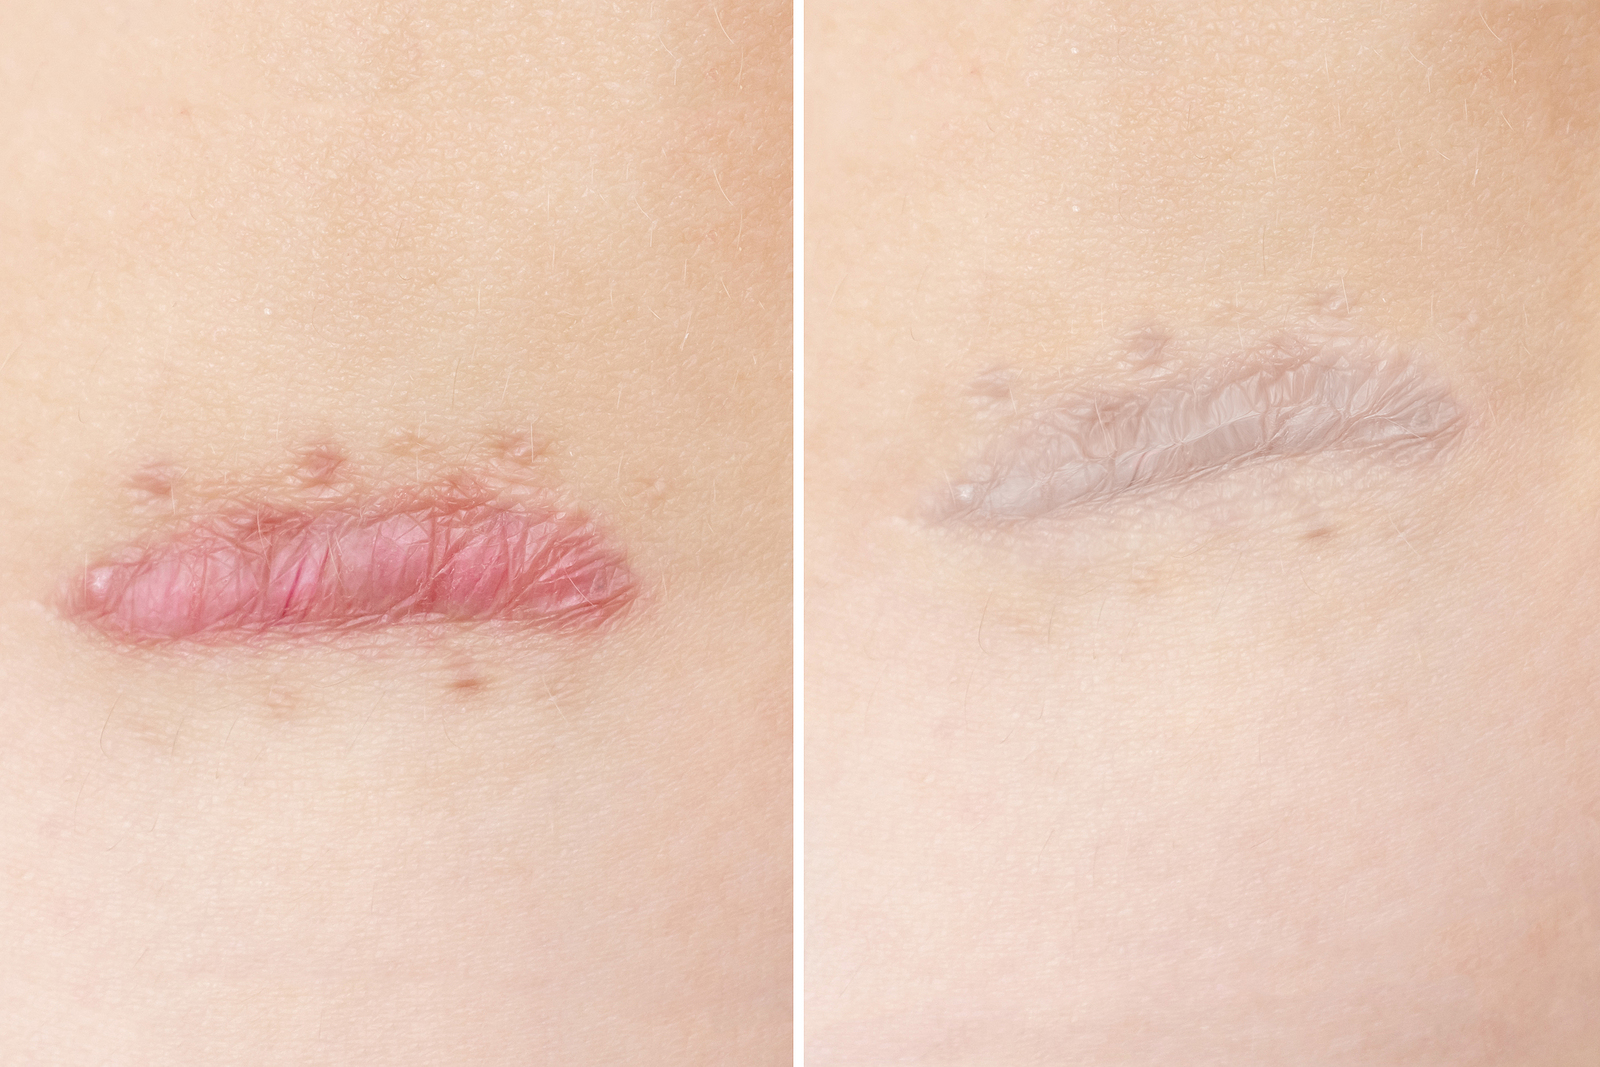 hypertrophic scar removal before and after